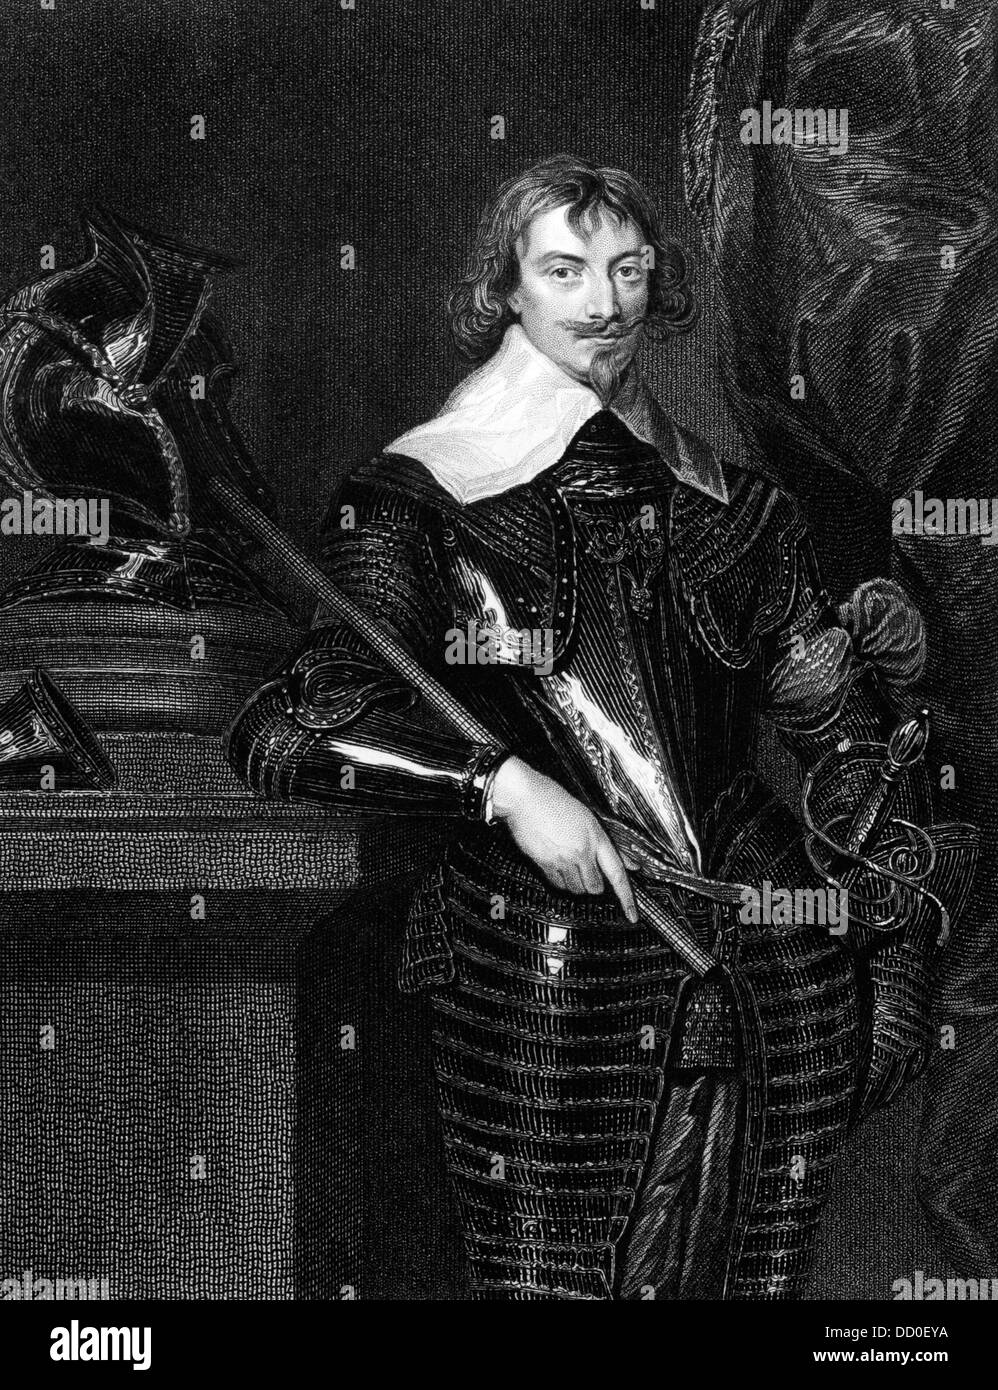 Robert Rich, 2nd Earl of Warwick (1587-1658) on engraving from 1827. English colonial administrator, admiral, and puritan. Stock Photo